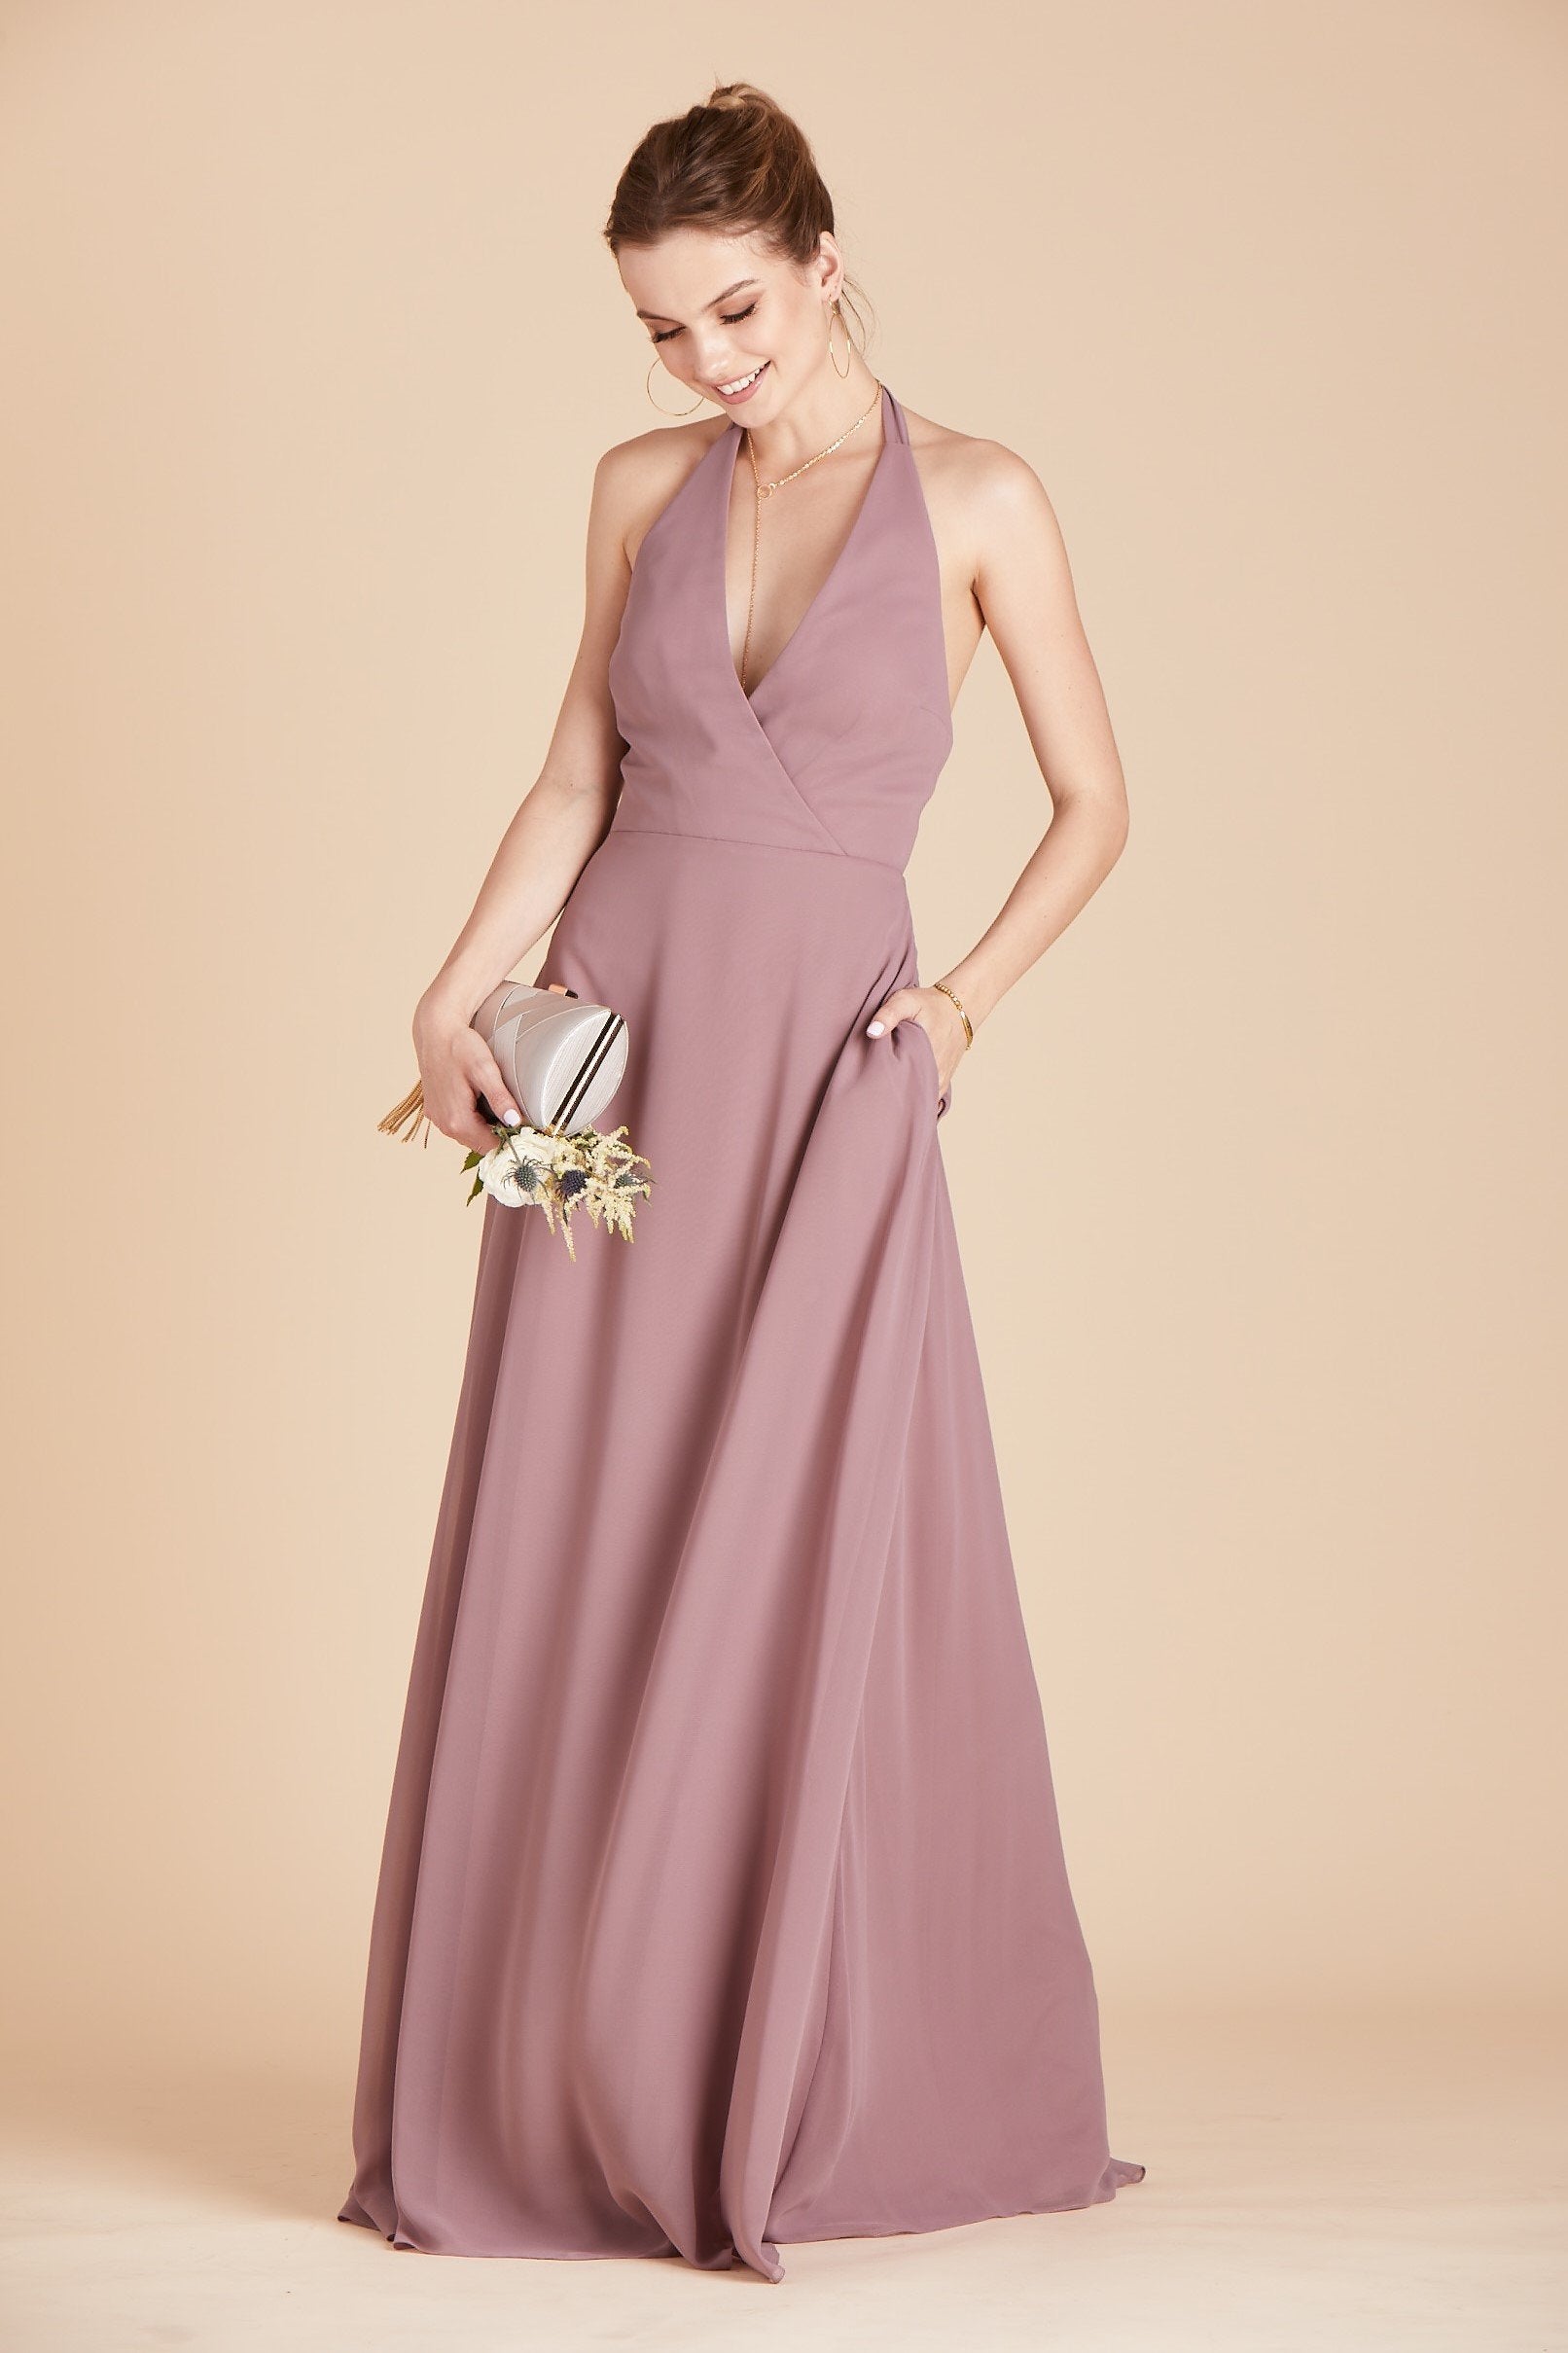 Moni convertible bridesmaids dress in dark mauve purple chiffon by Birdy Grey, front view with hand in pocket